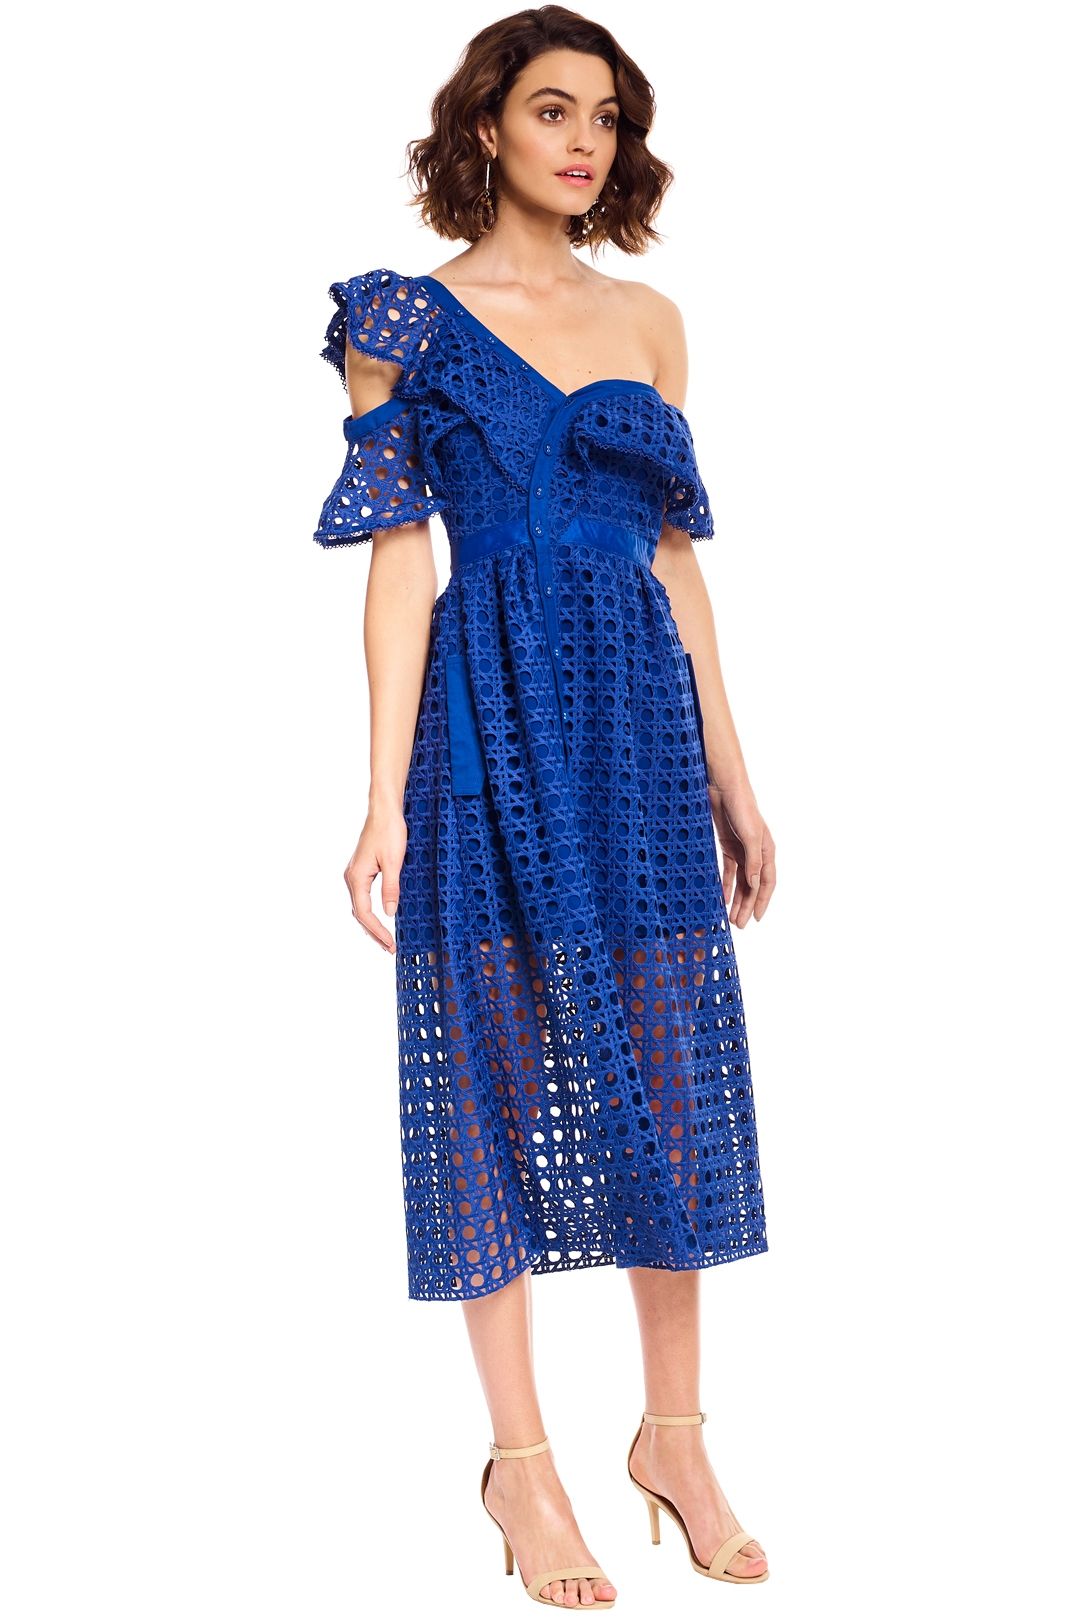 Guipure Frill Dress in Cobalt Blue by Self Portrait for Rent